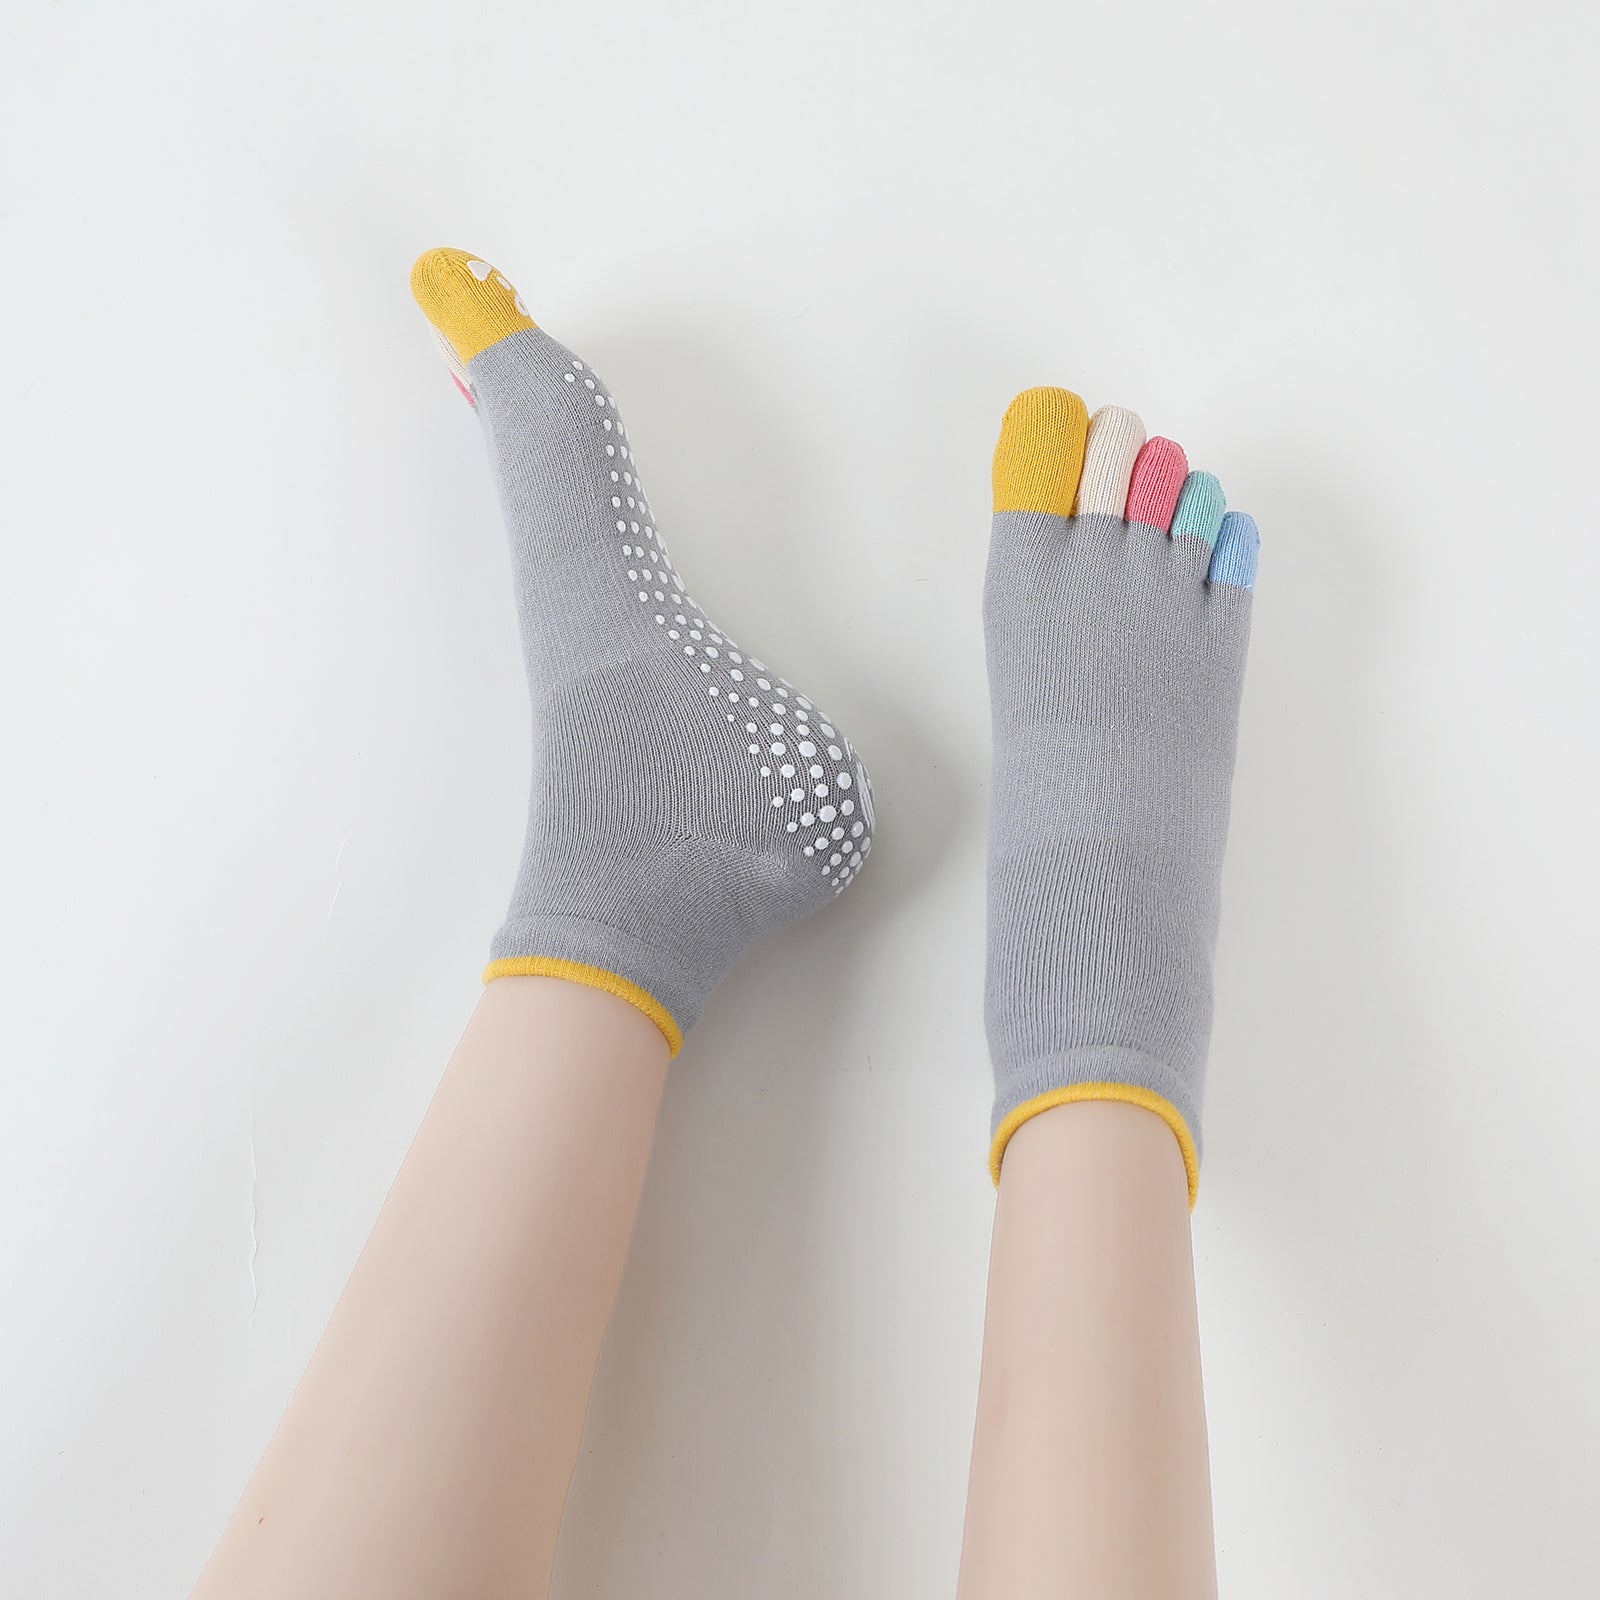 Buy Wholesale China Yoga Toe Socks With Grips For Women Non-slip